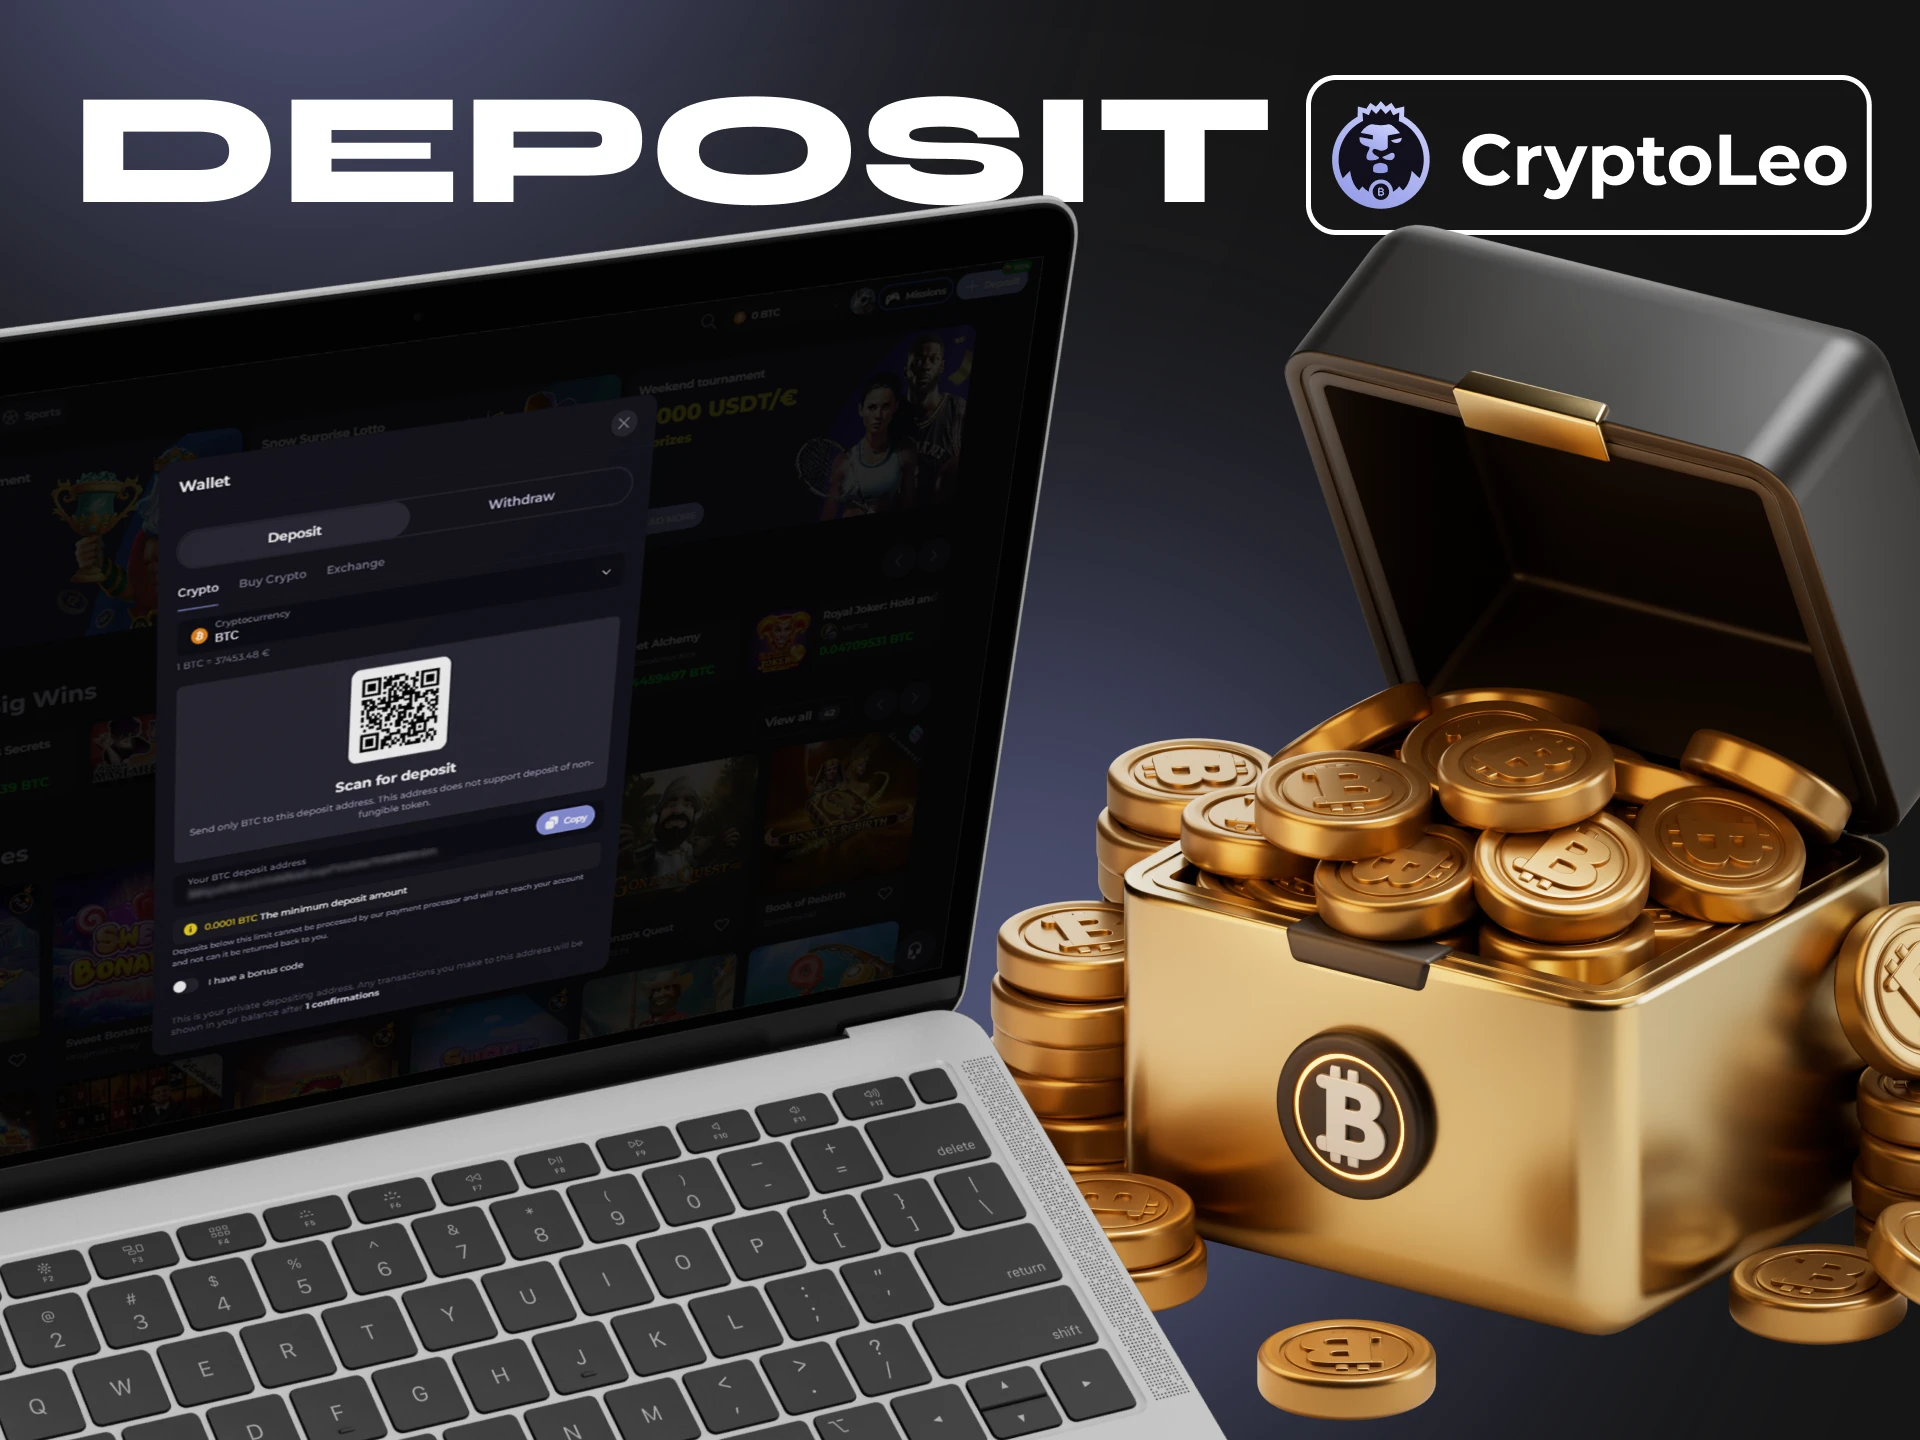 Follow these instructions to deposit money into your Cryptoleo account.